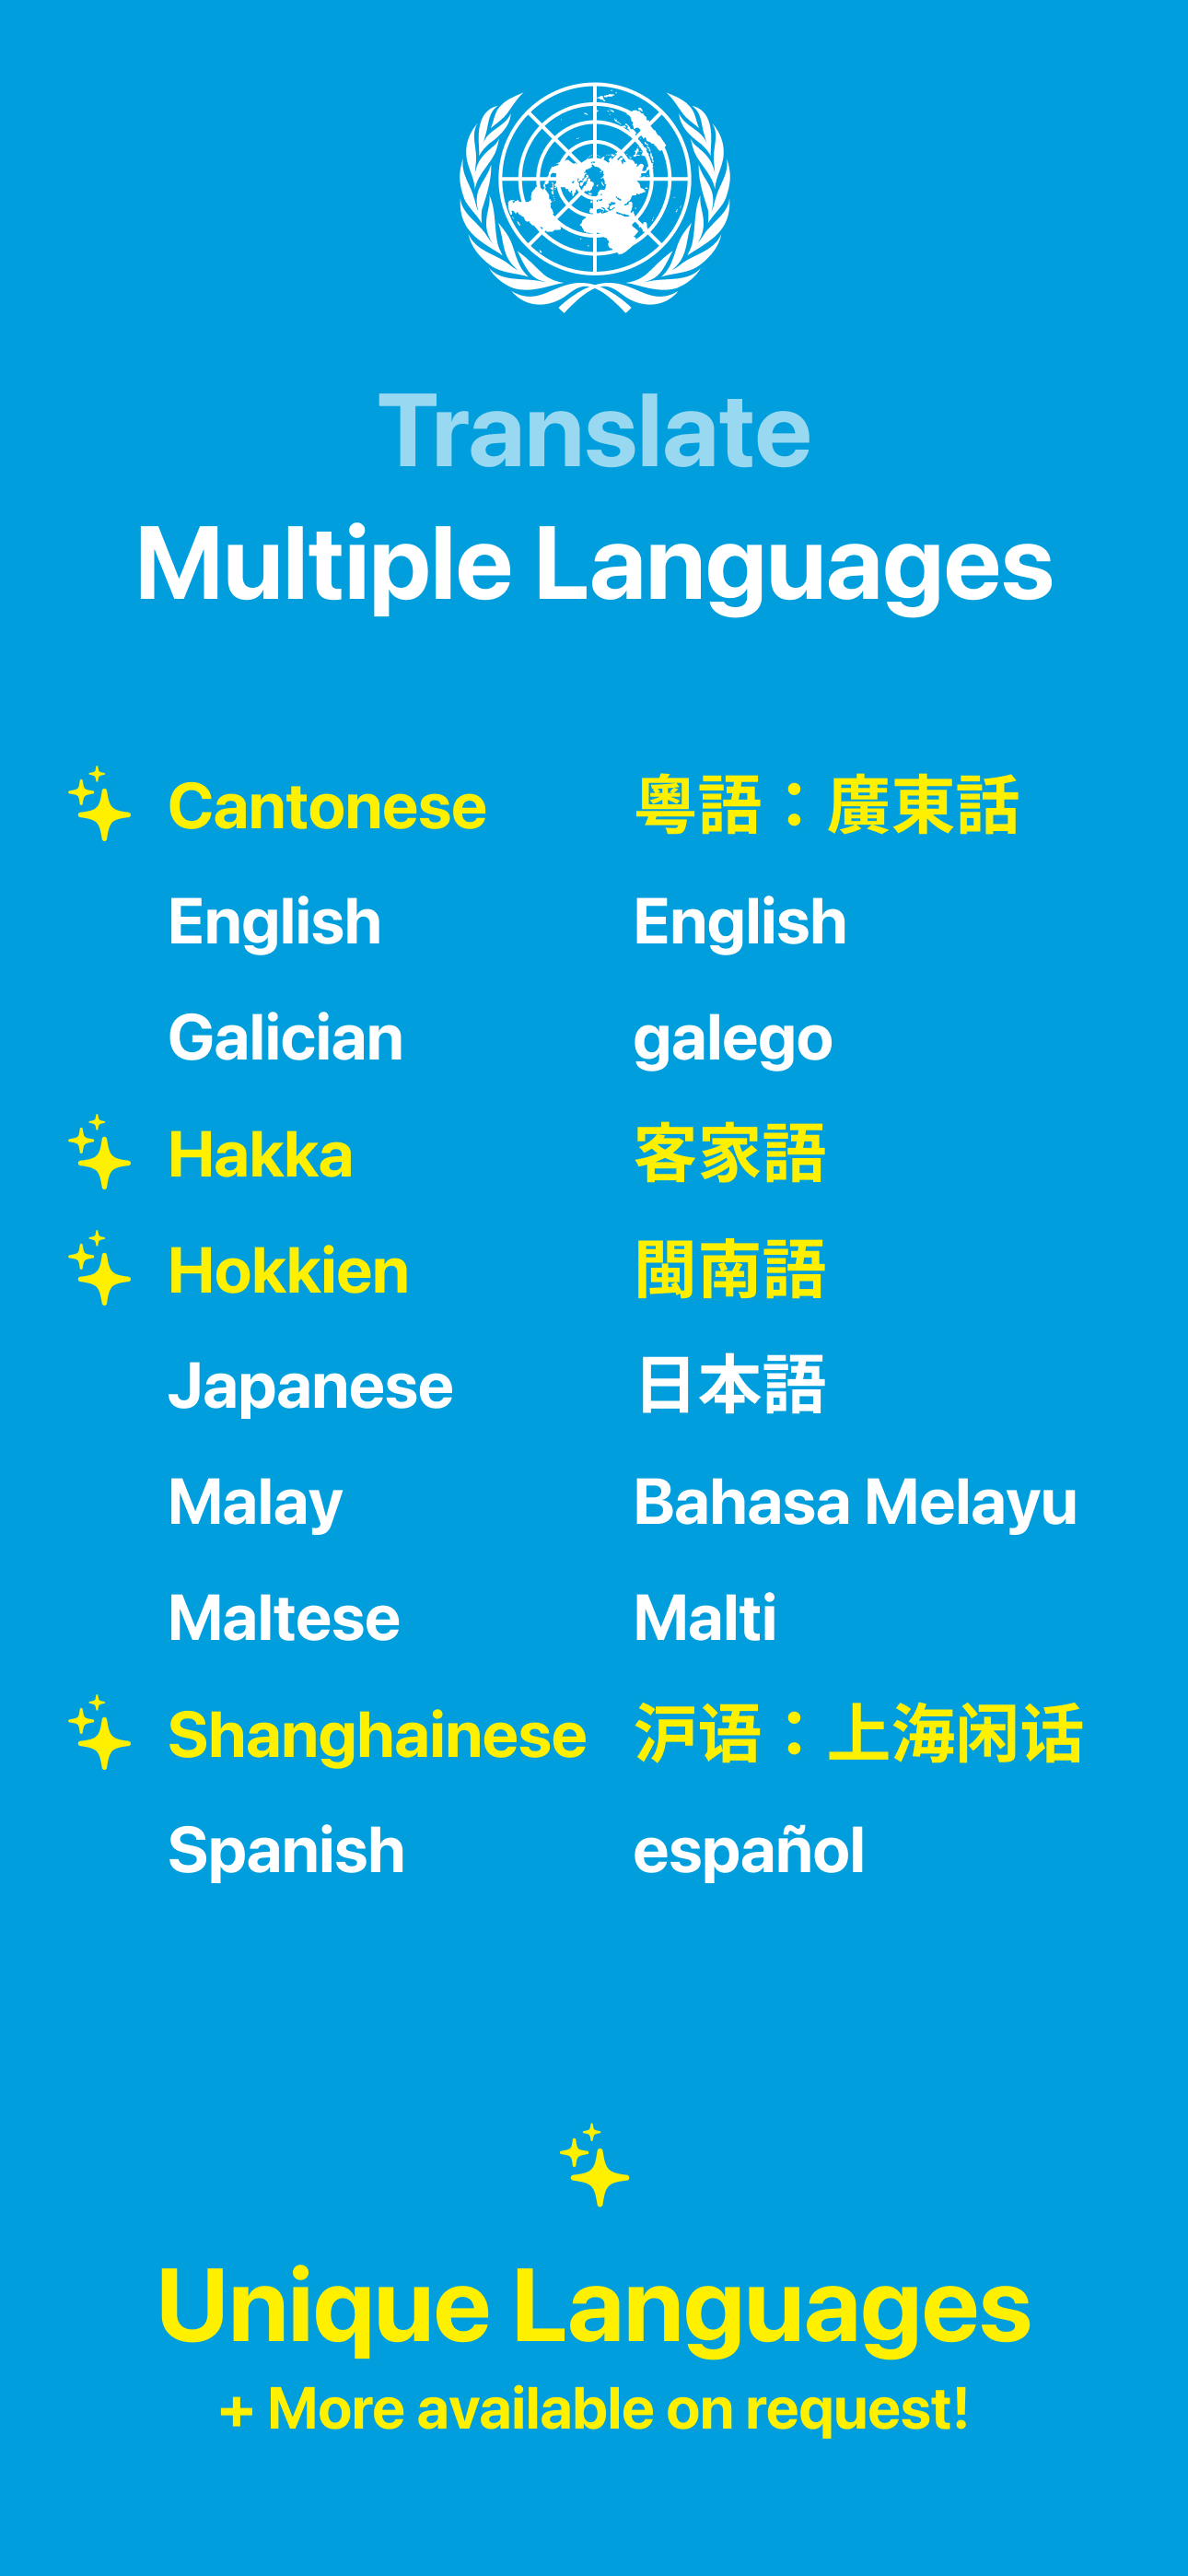 List of available languages on Translate and Learn